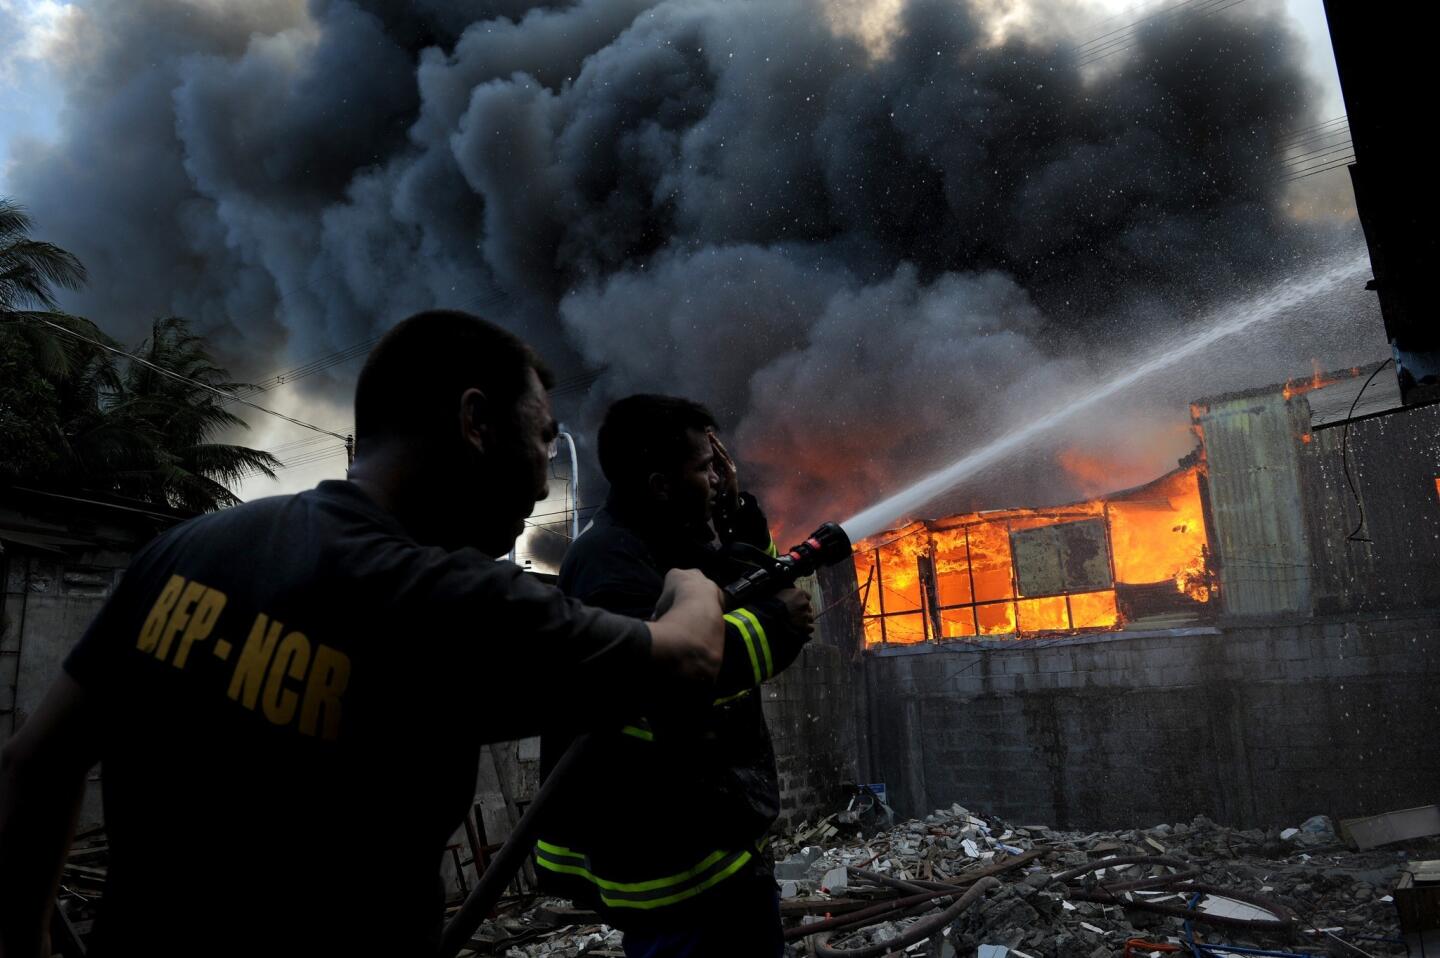 Firefighters extinguish a fire that engulfed a residential area in Manila. Almost 400 houses were destroyed, leaving 600 families homeless, according to local media reports.